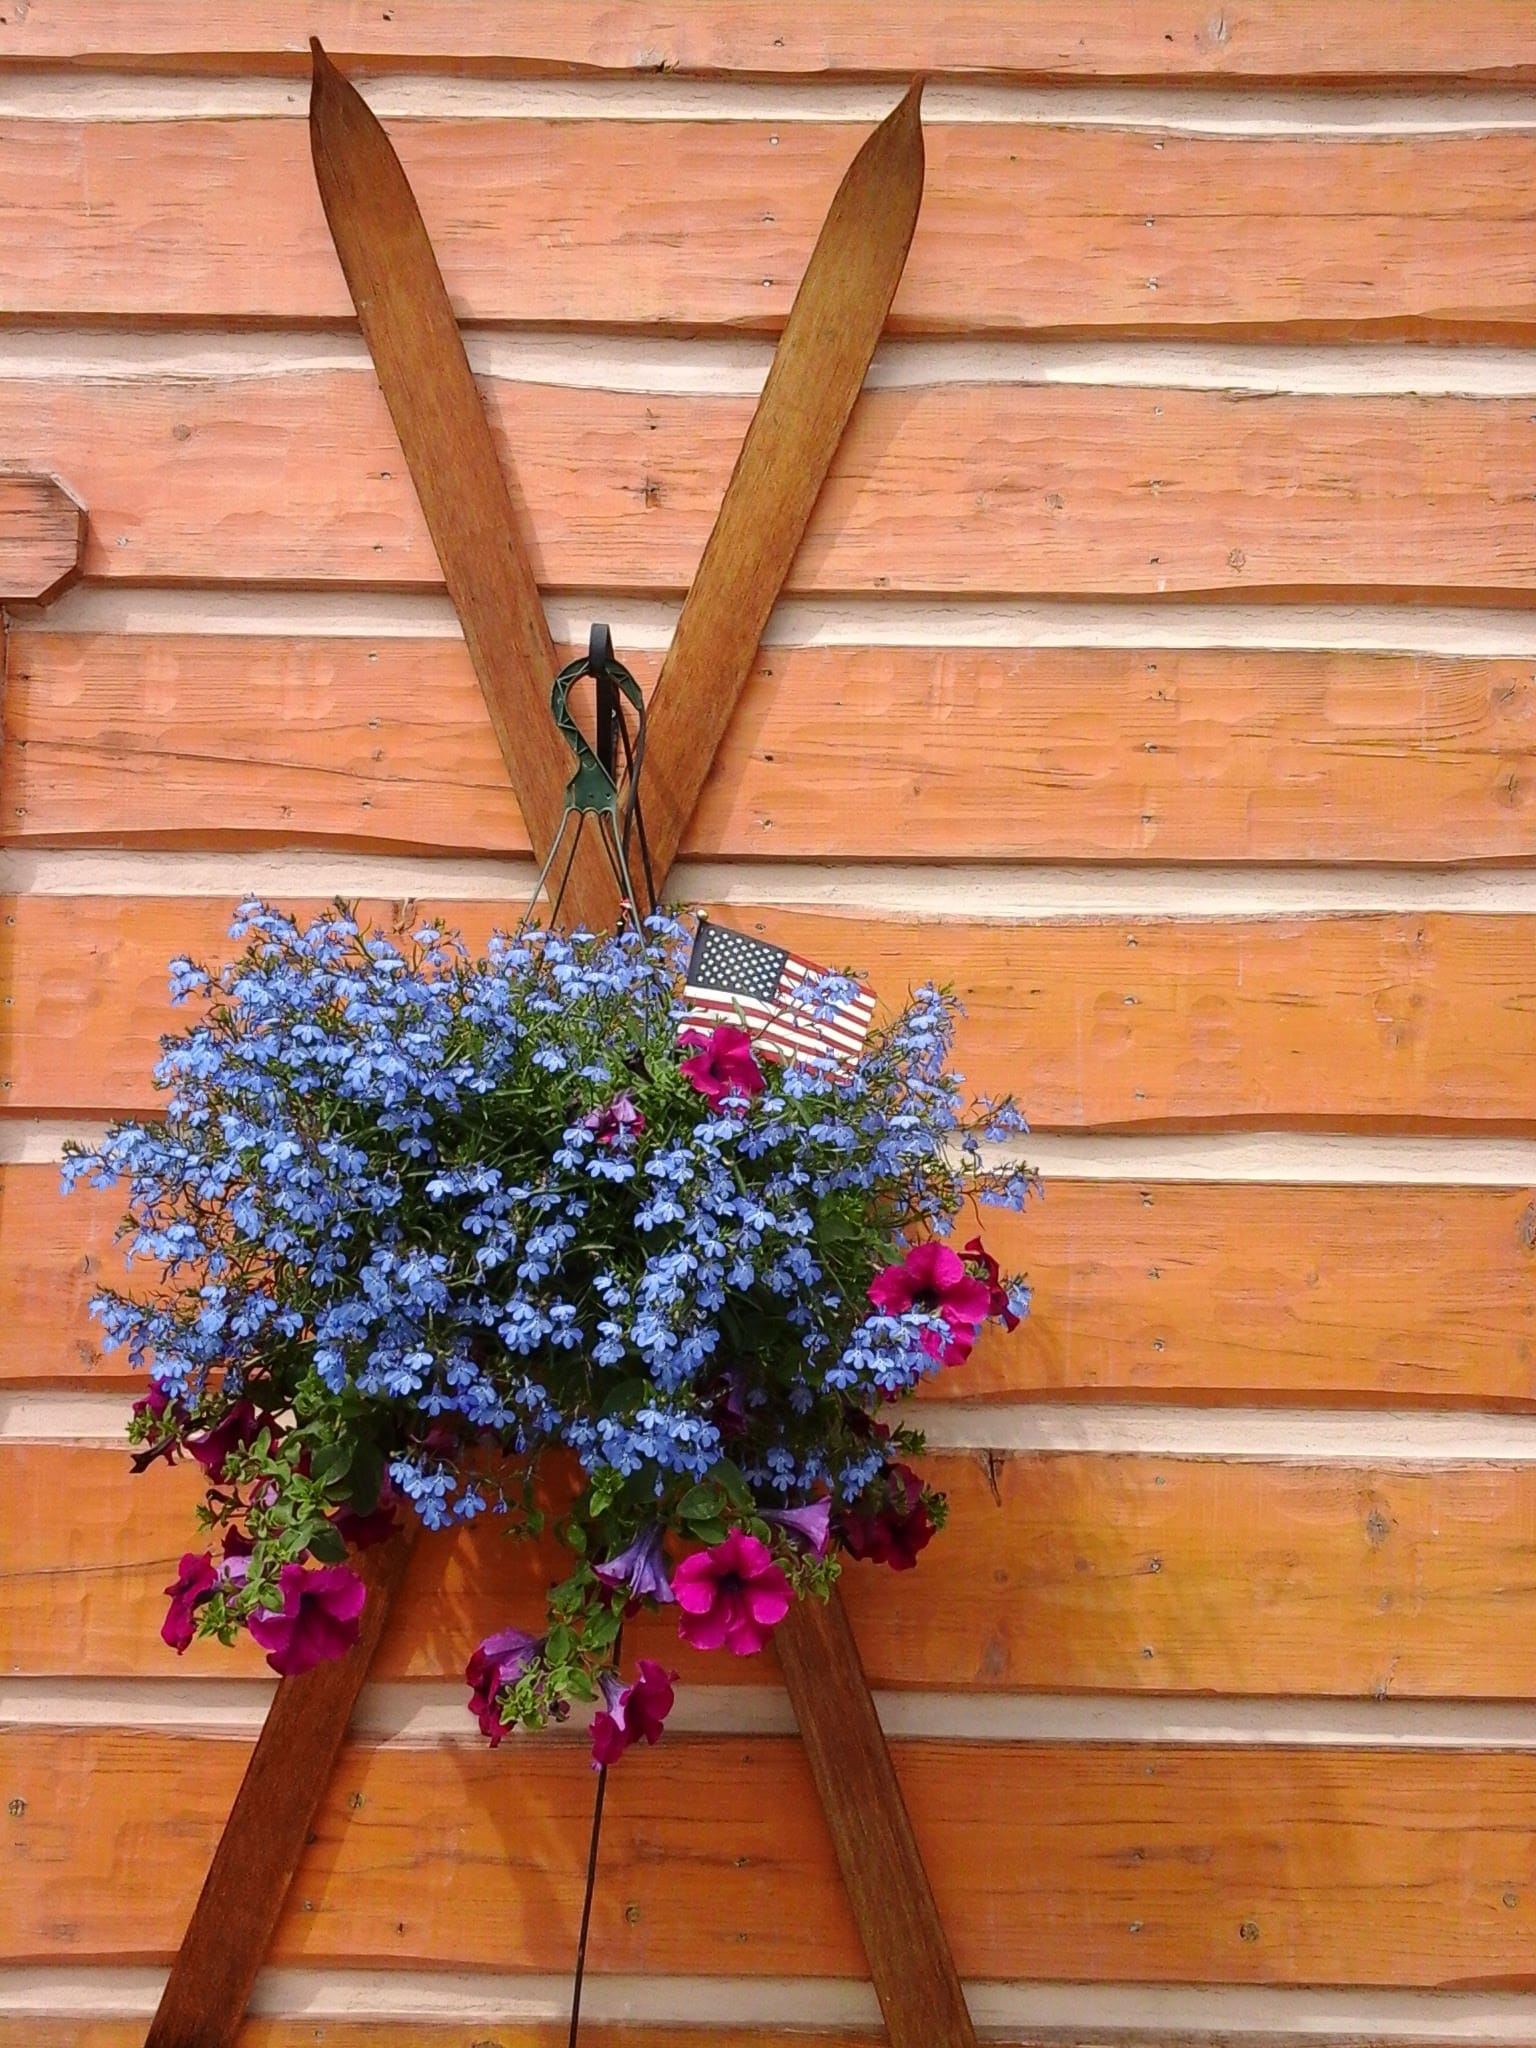 Exterior photo of a large hanging flower basket with purple and pink flowers and an American flag.  Basket hanging over antique skies on  log sided condo.